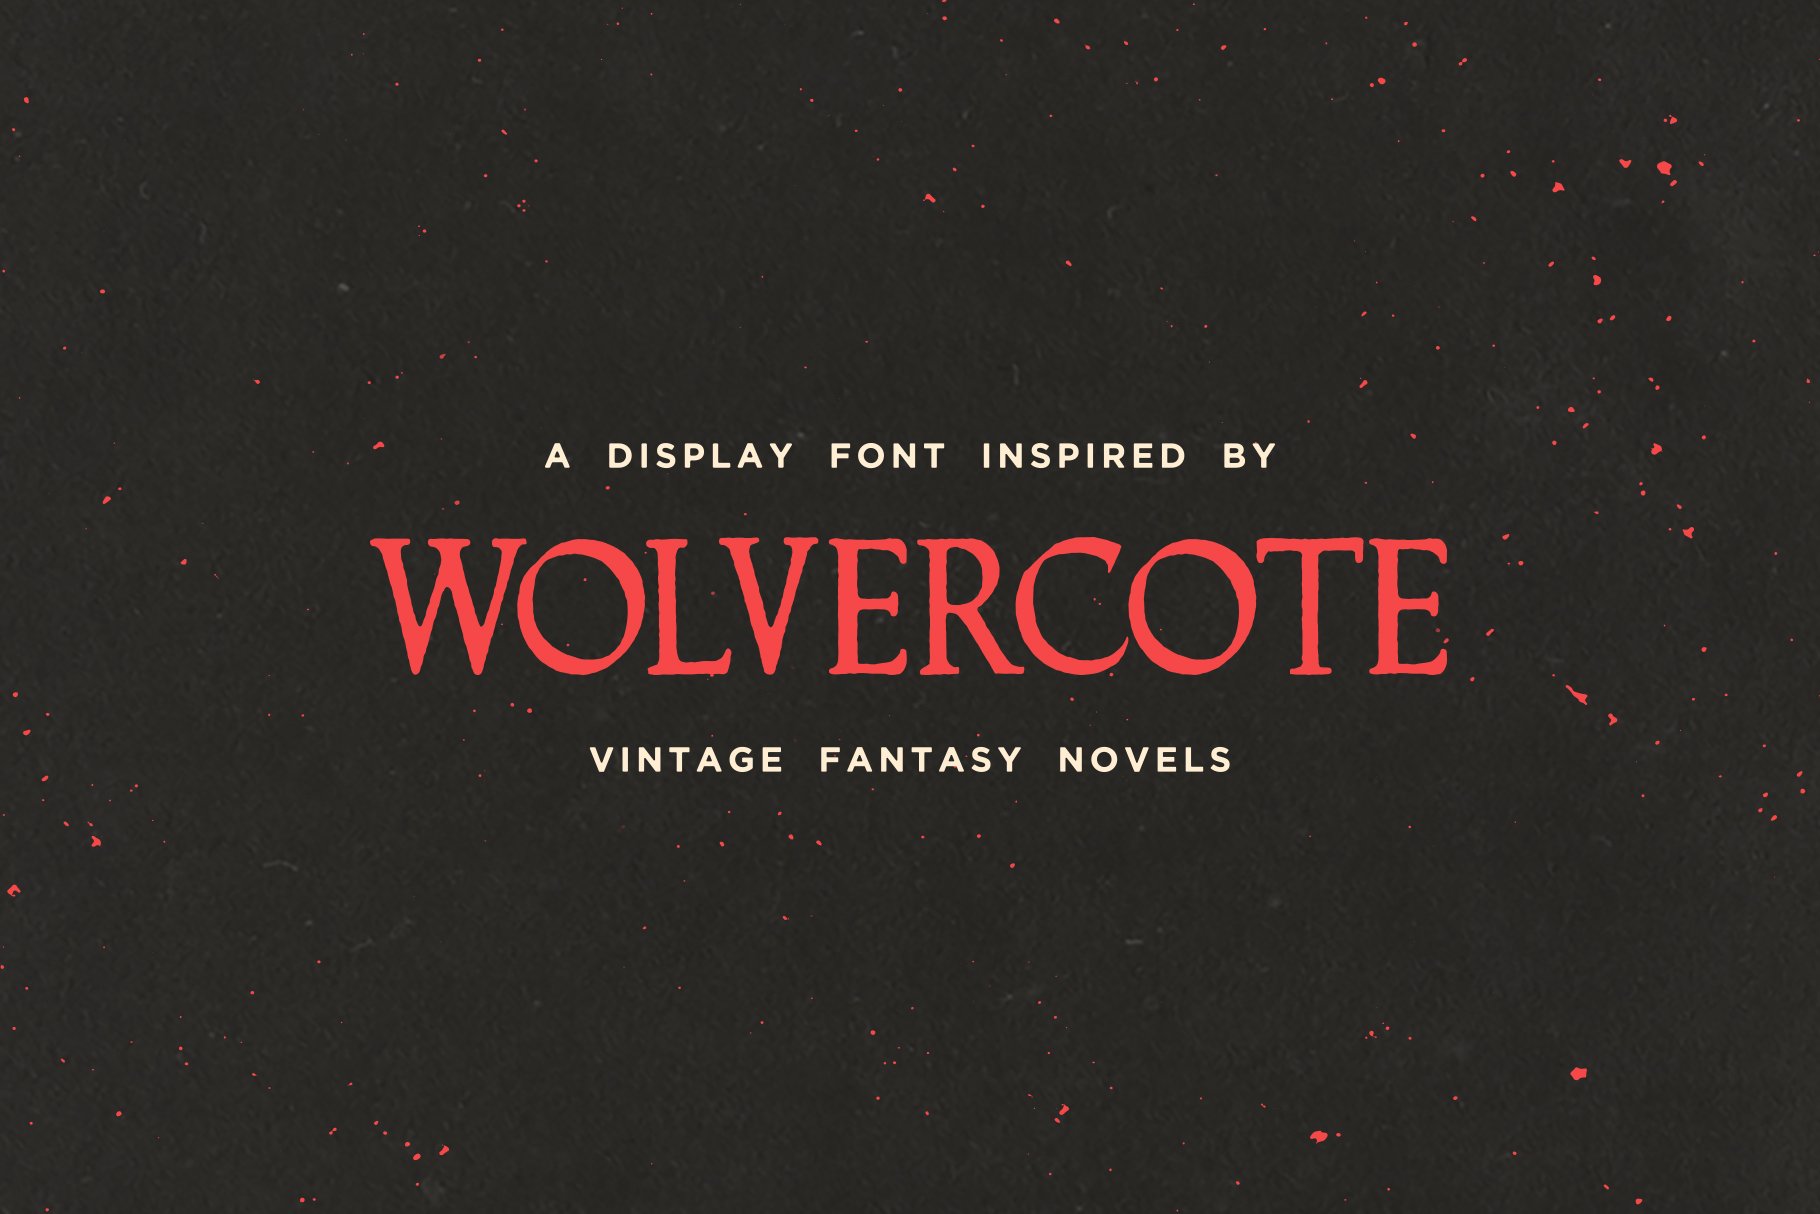 Wolvercote - A Fantasy Display Font cover image.